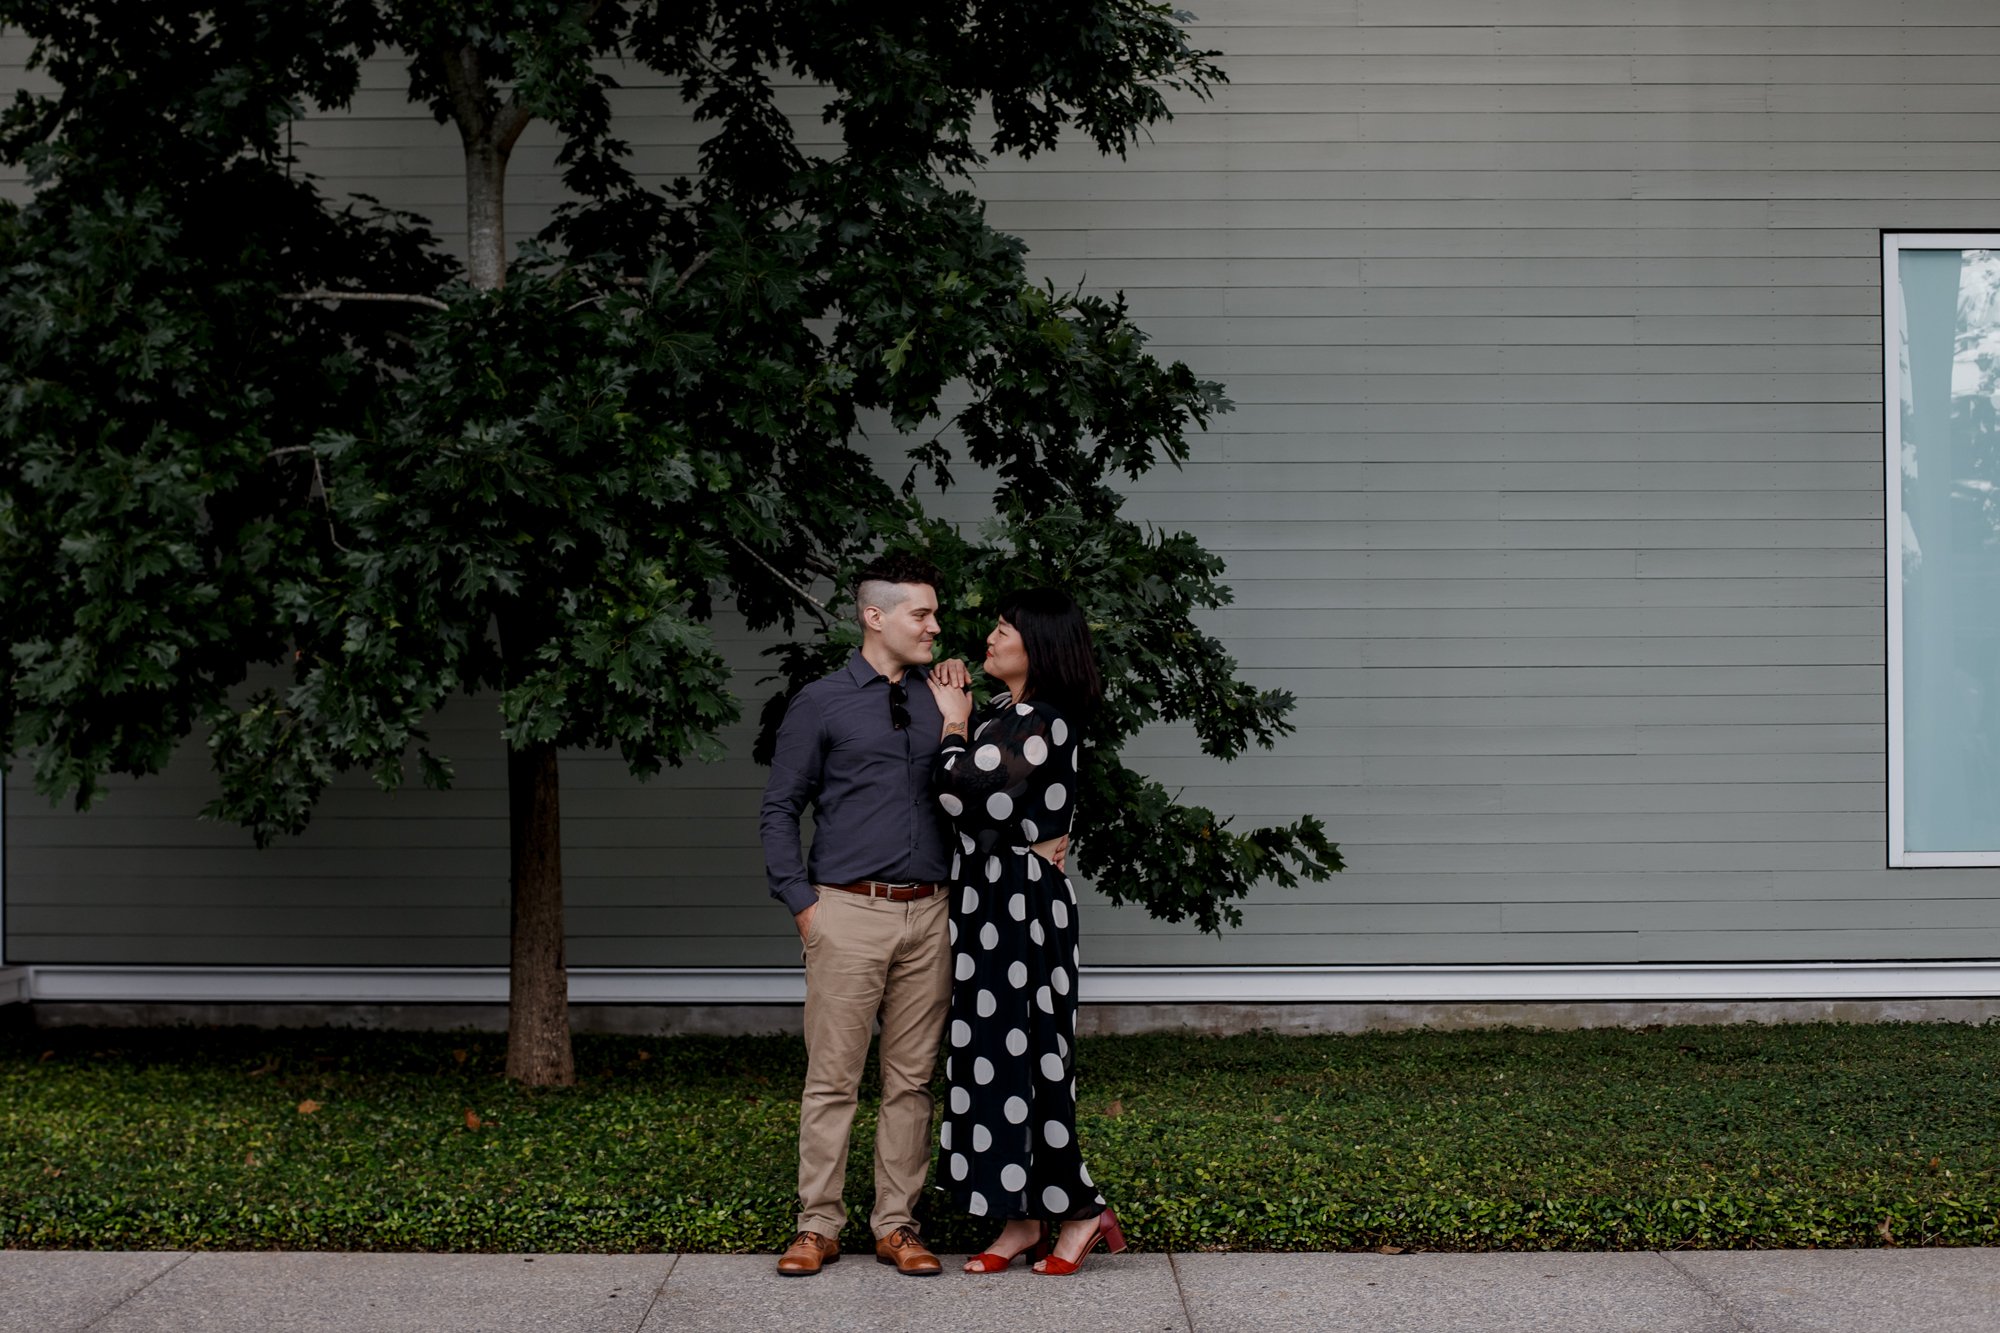 Couple hugging by the bamboo - Stylish Polka Dot Dress Engagement Photo Session at Menil Park